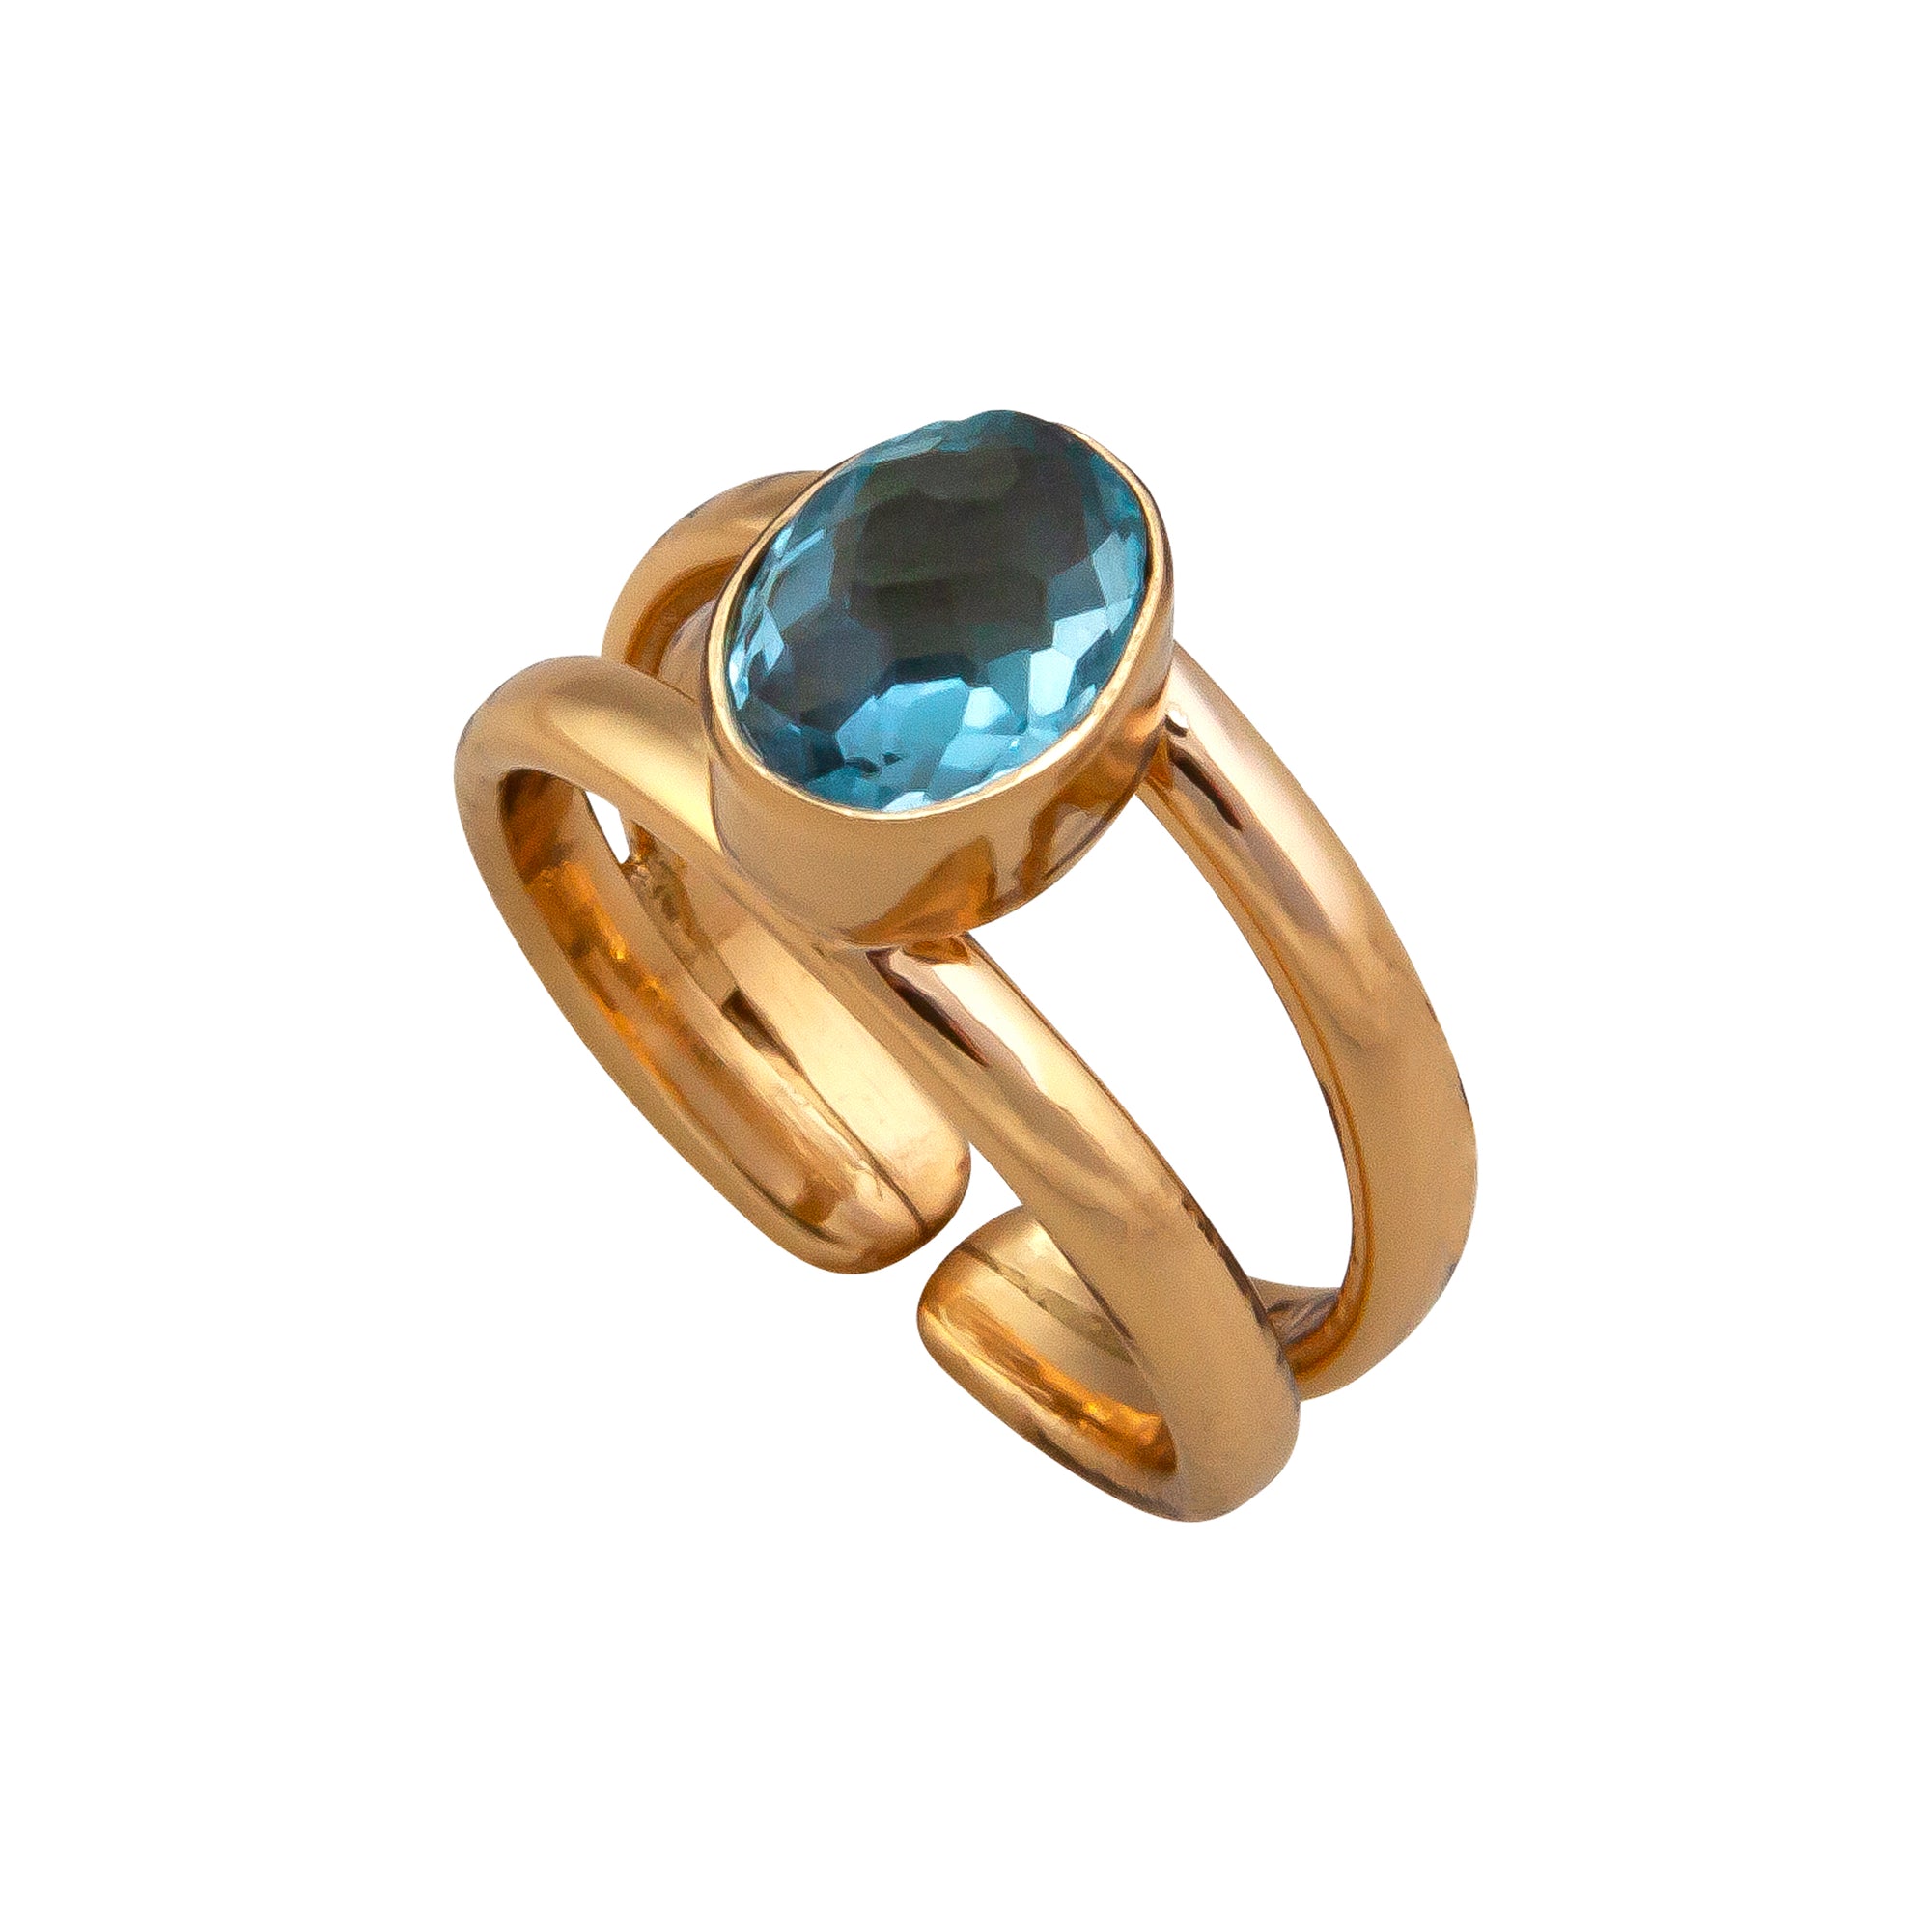 Alchemia Blue Topaz Double Band Adjustable Ring | Charles Albert Jewelry